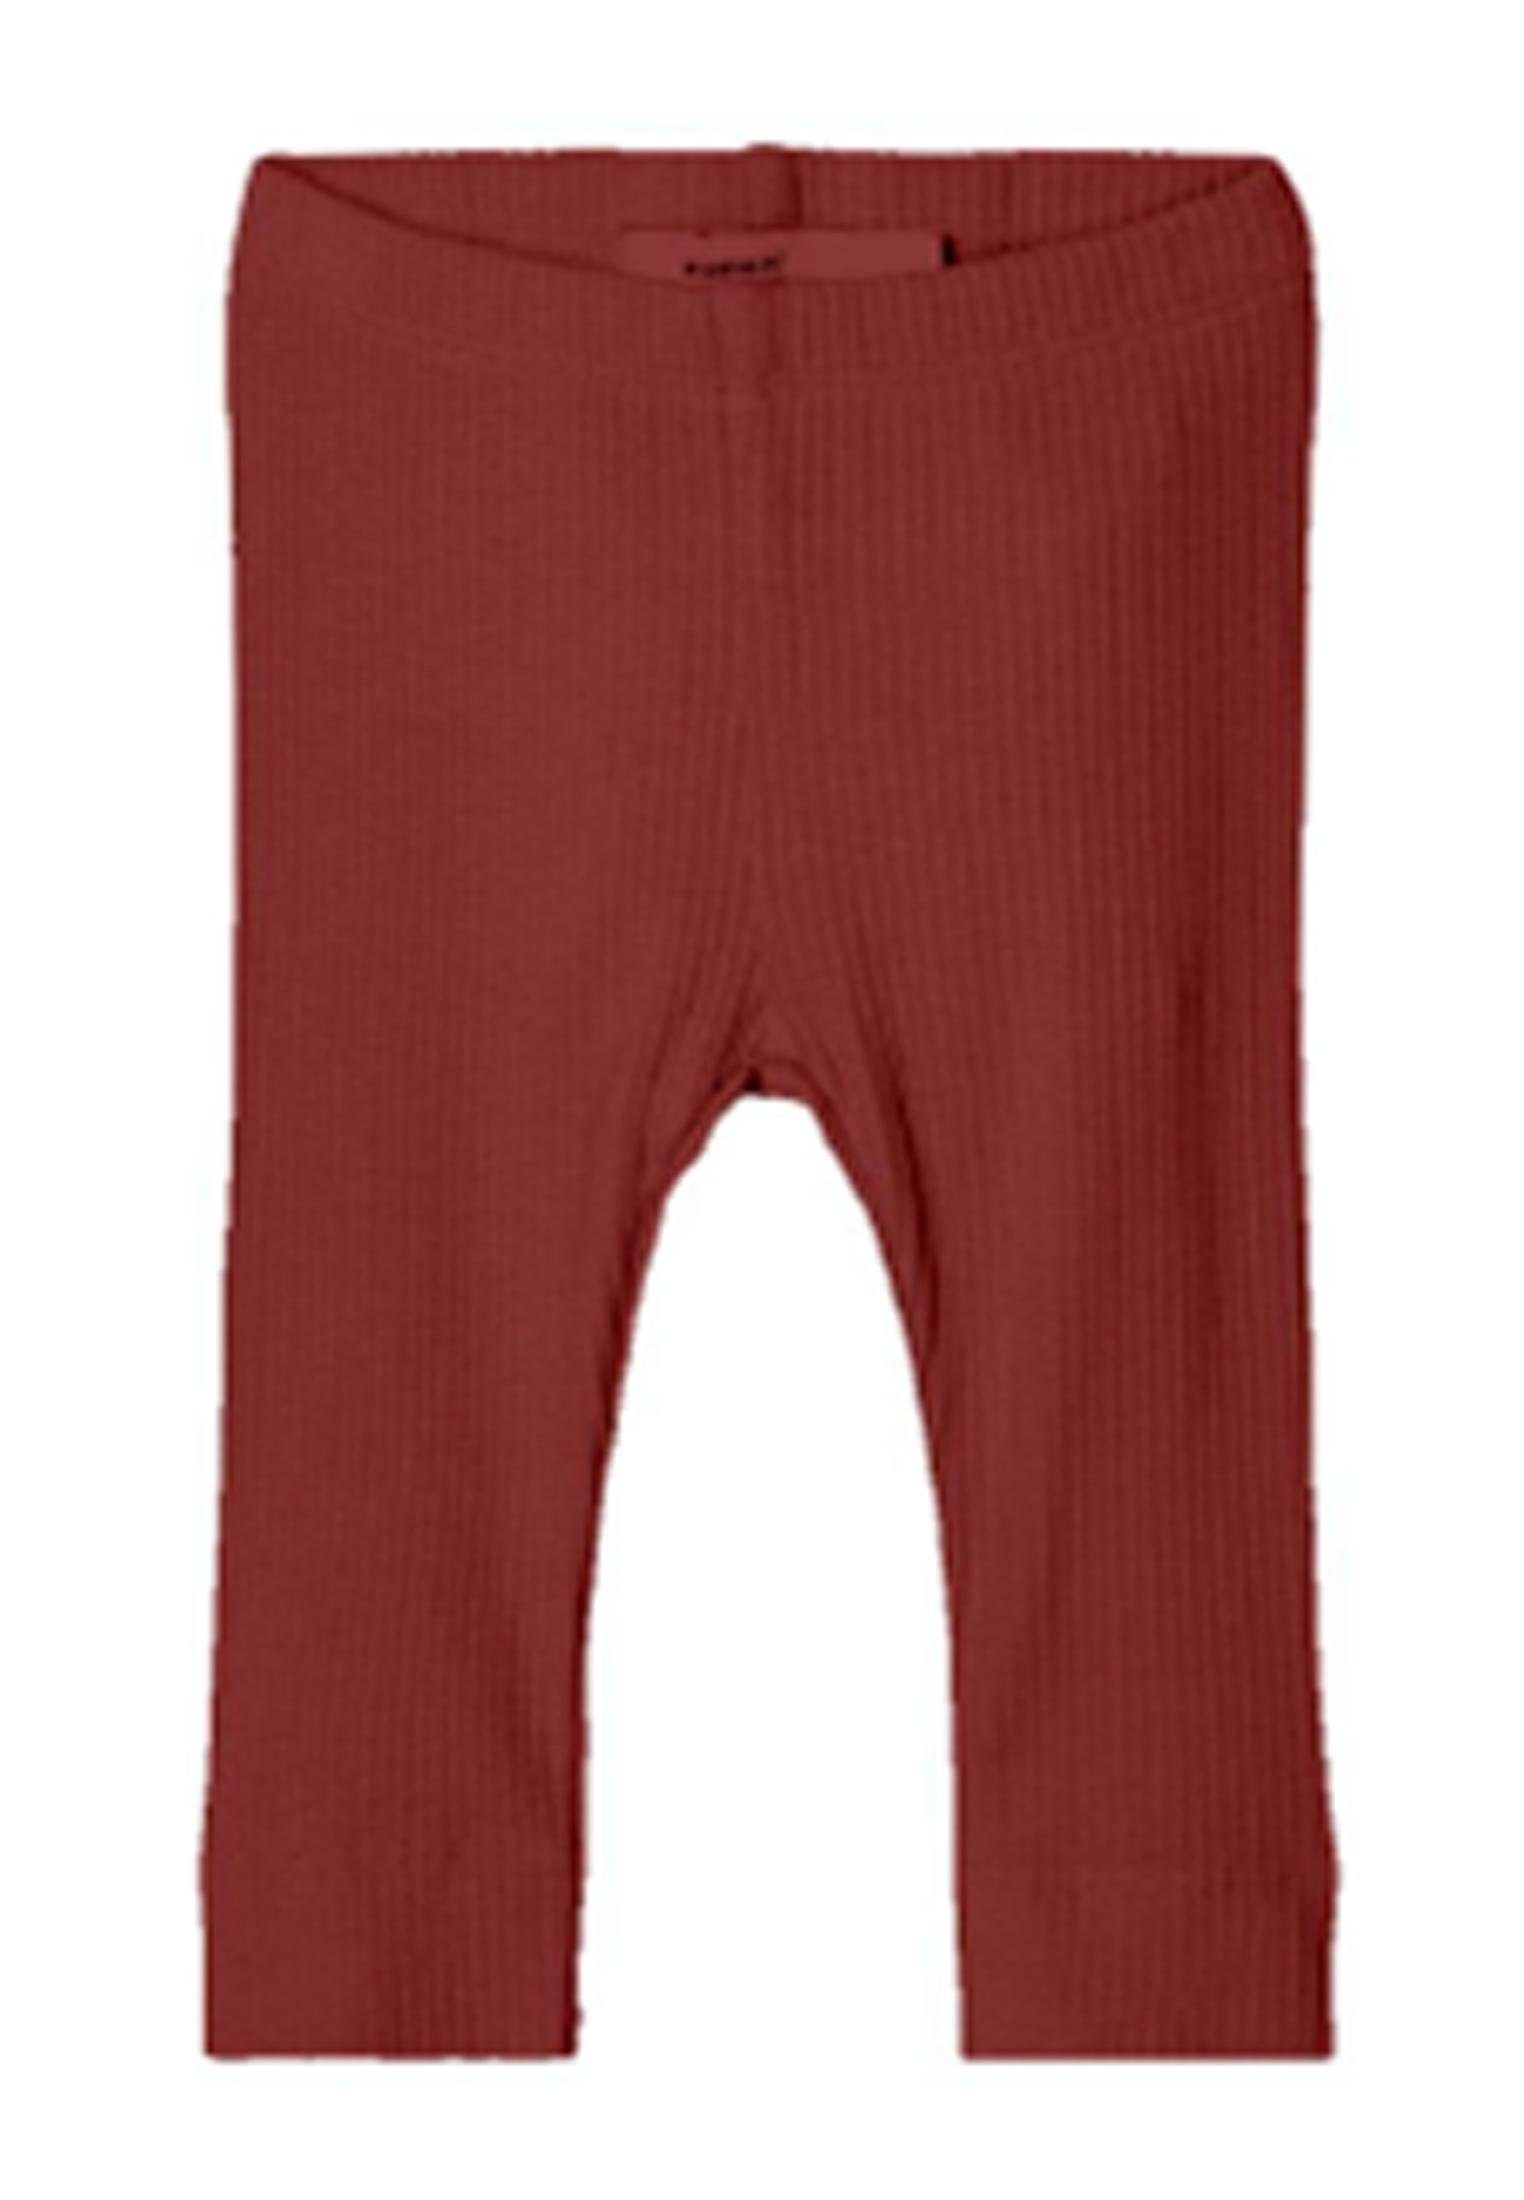 Rose Basic Withered Ripp Sweatpants Leggings It Baby It in Bio-Baumwolle Name Name (1-tlg)